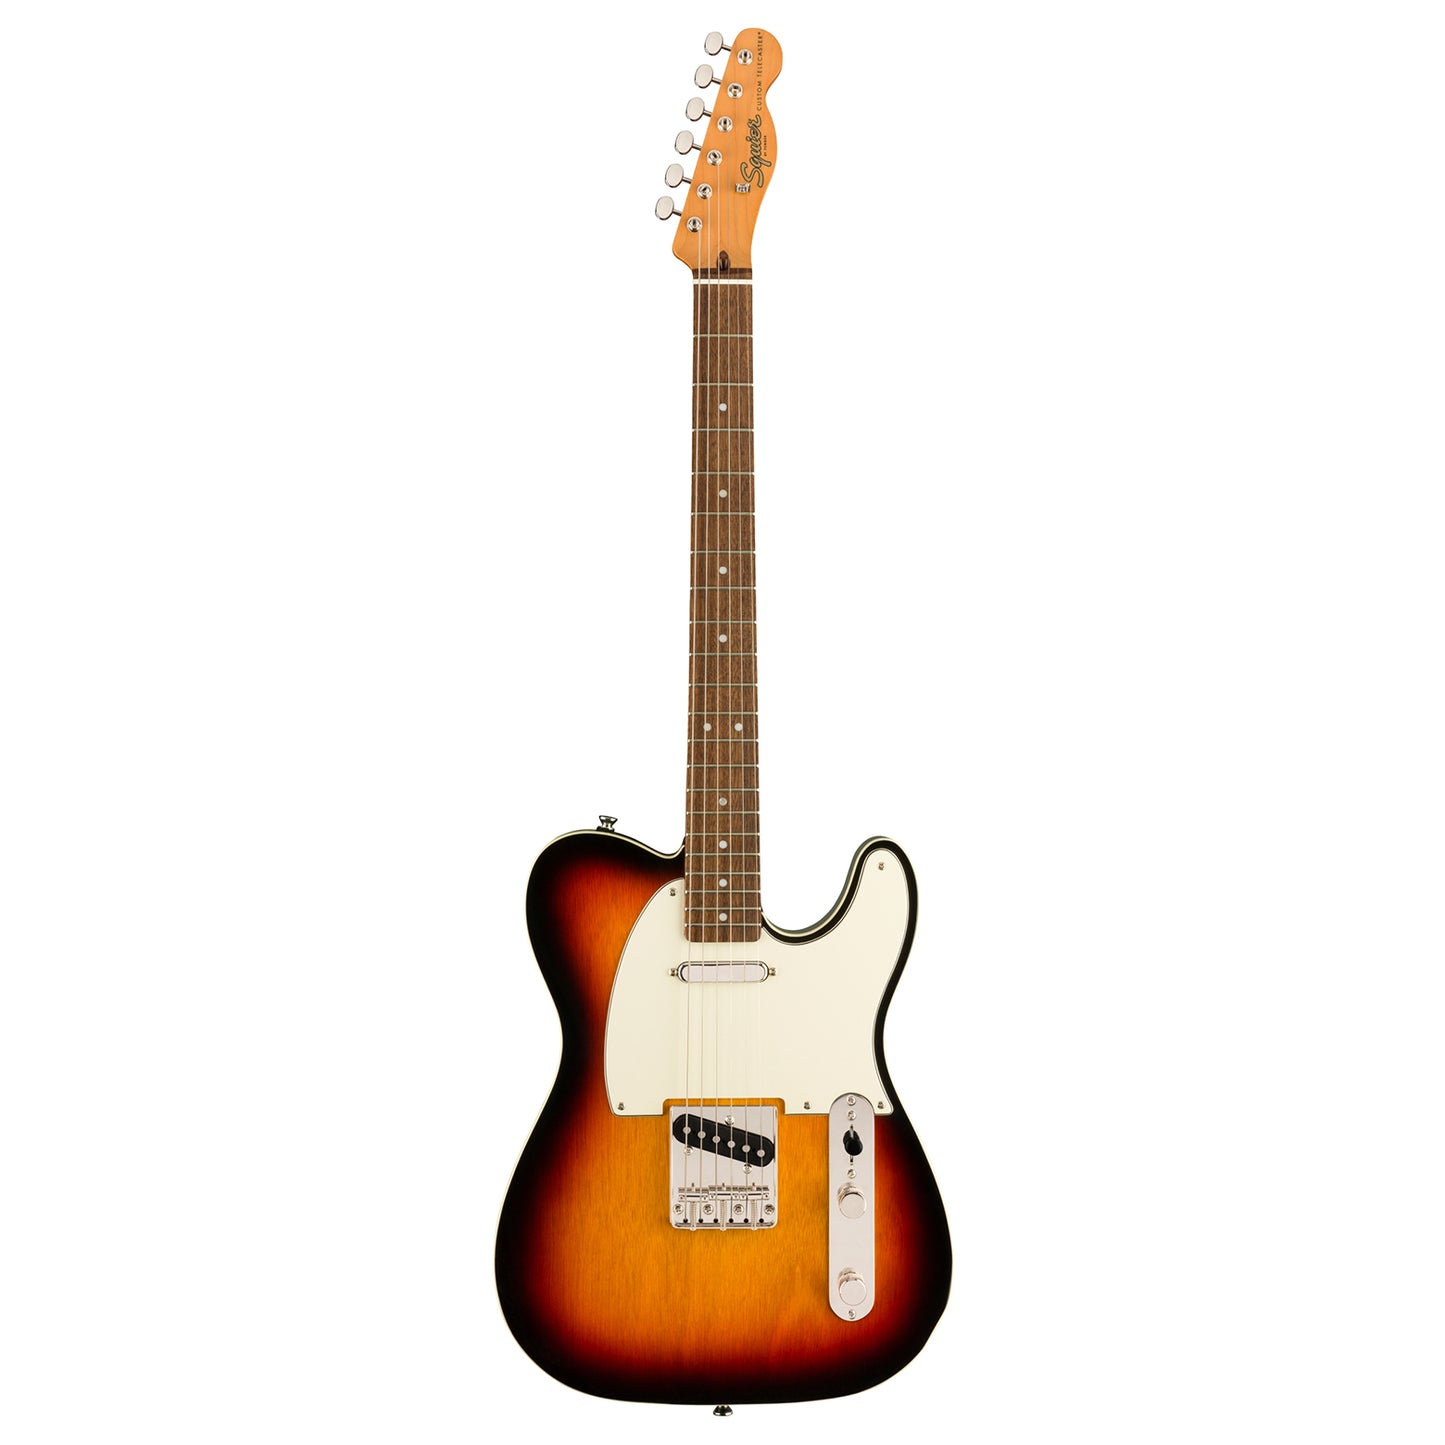 Squier by Fender Classic Vibe 60's Custom Telecaster Electric Guitar Vintage Style LRL with SS Single Coil Pickup, Laurel Fingerboard (3-Tone Sunburst)